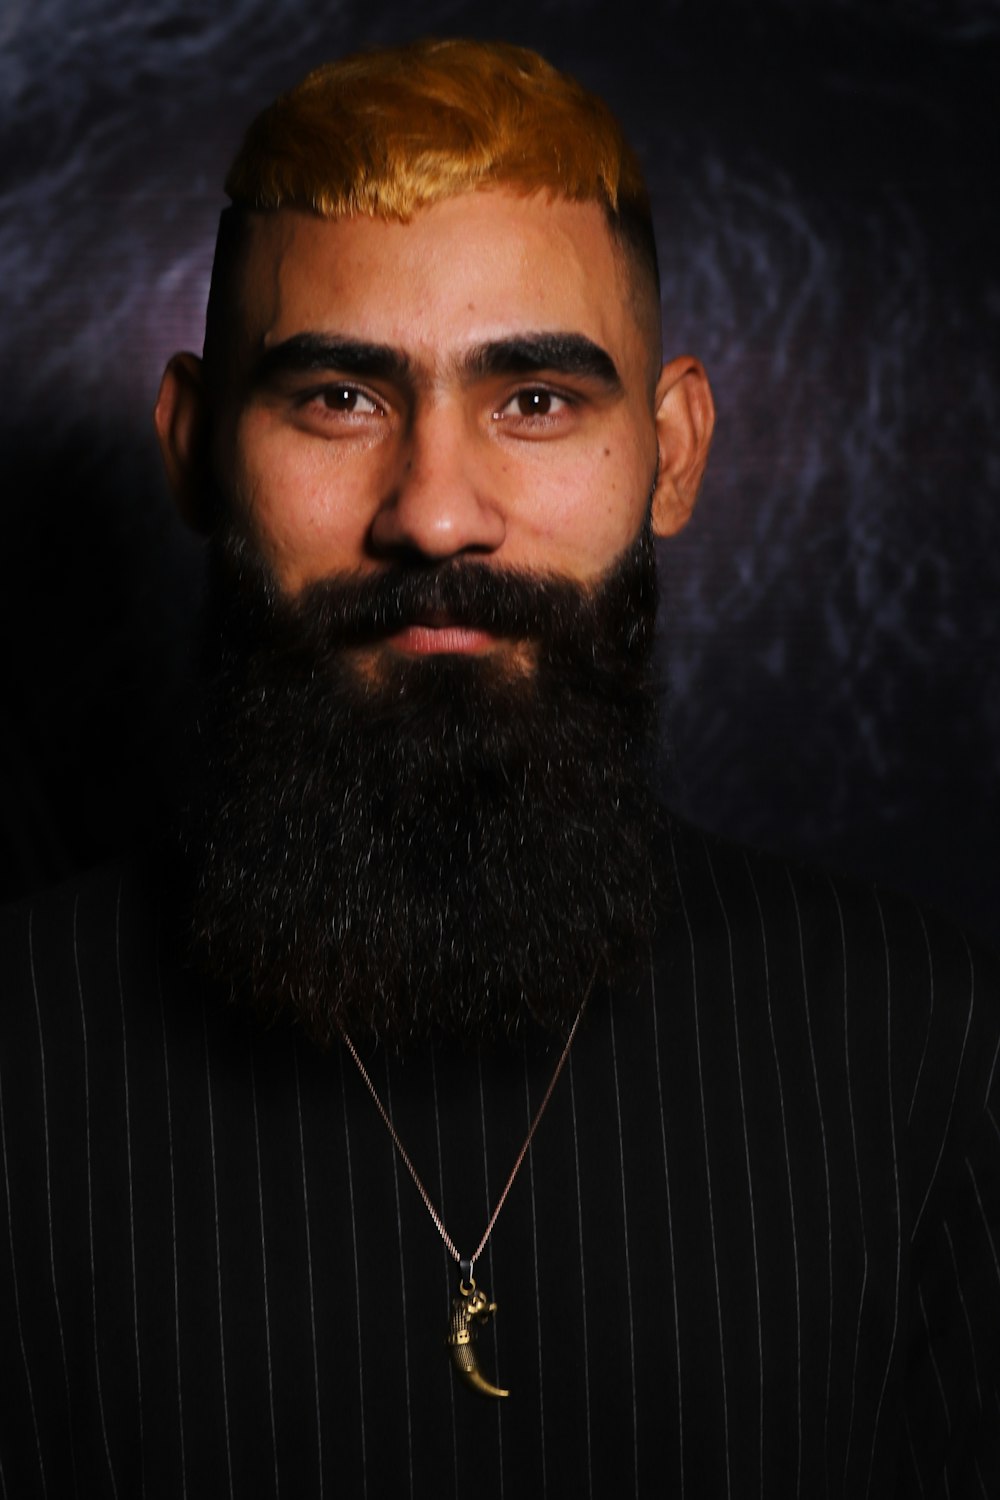 a man with a beard wearing a suit and a necklace